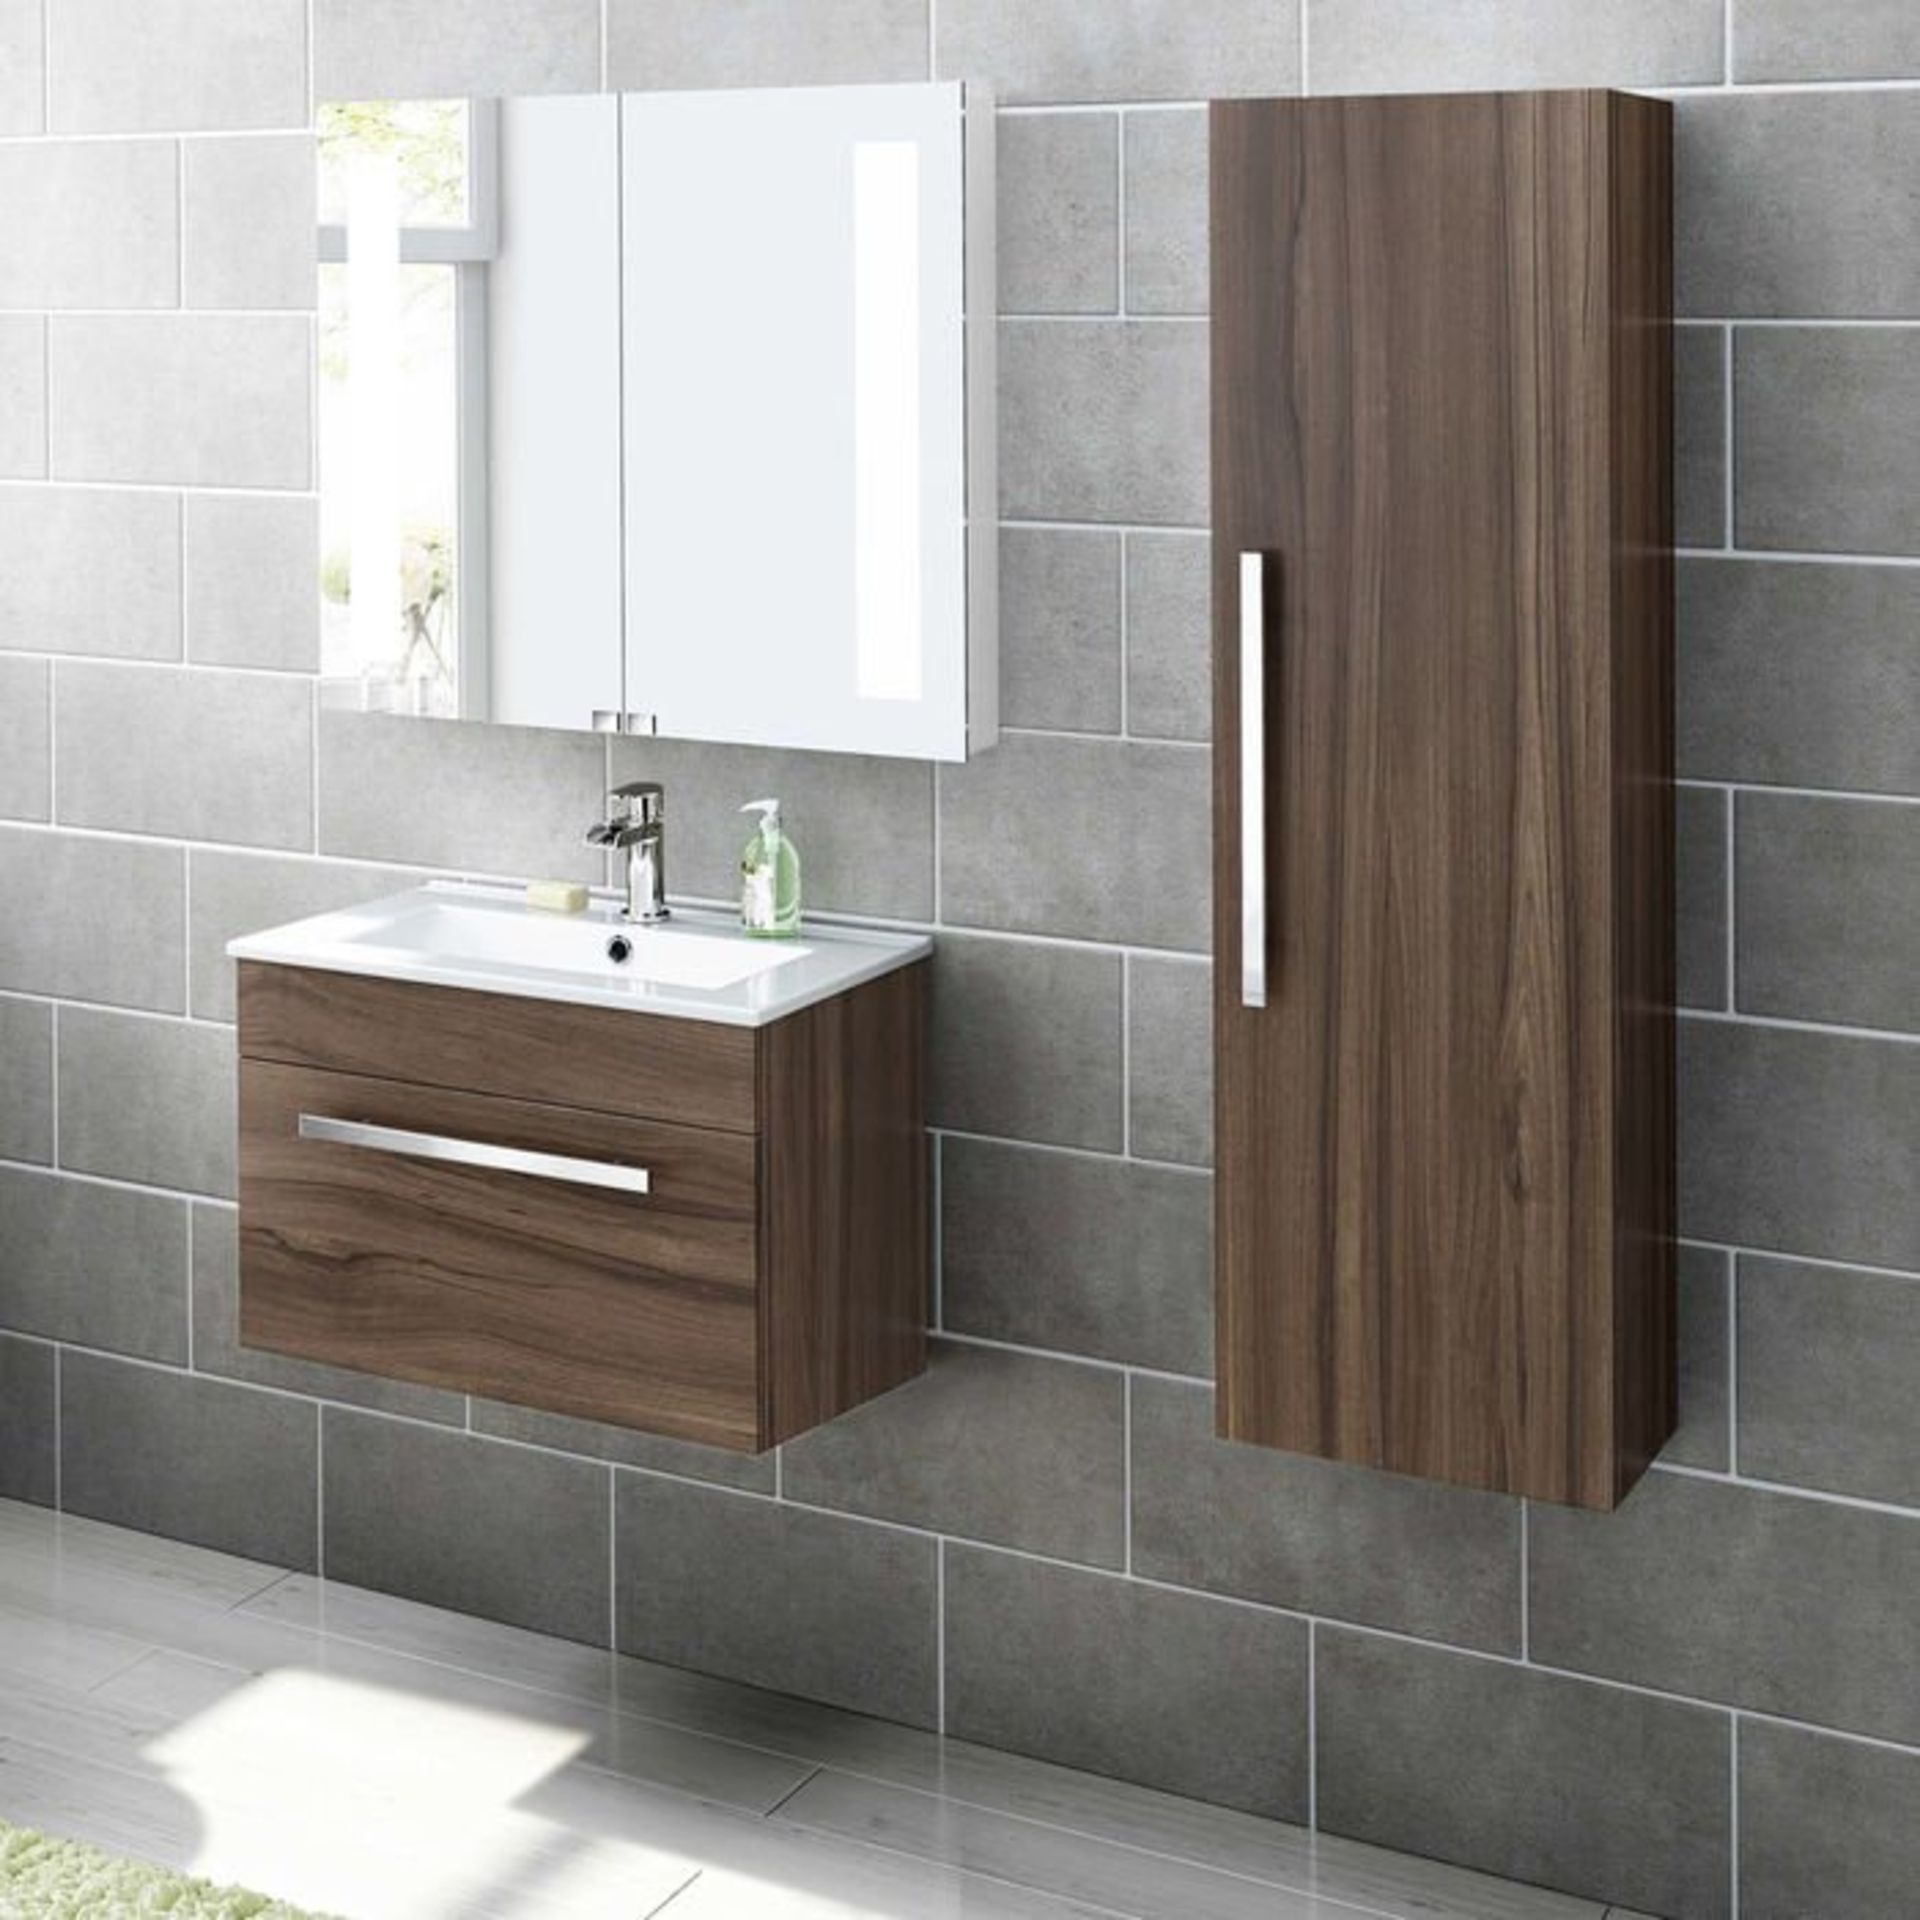 (G16) 1200mm Avon Walnut Effect Tall Storage Cabinet - Wall Hung RRP £274.99 Engineered with - Image 2 of 6